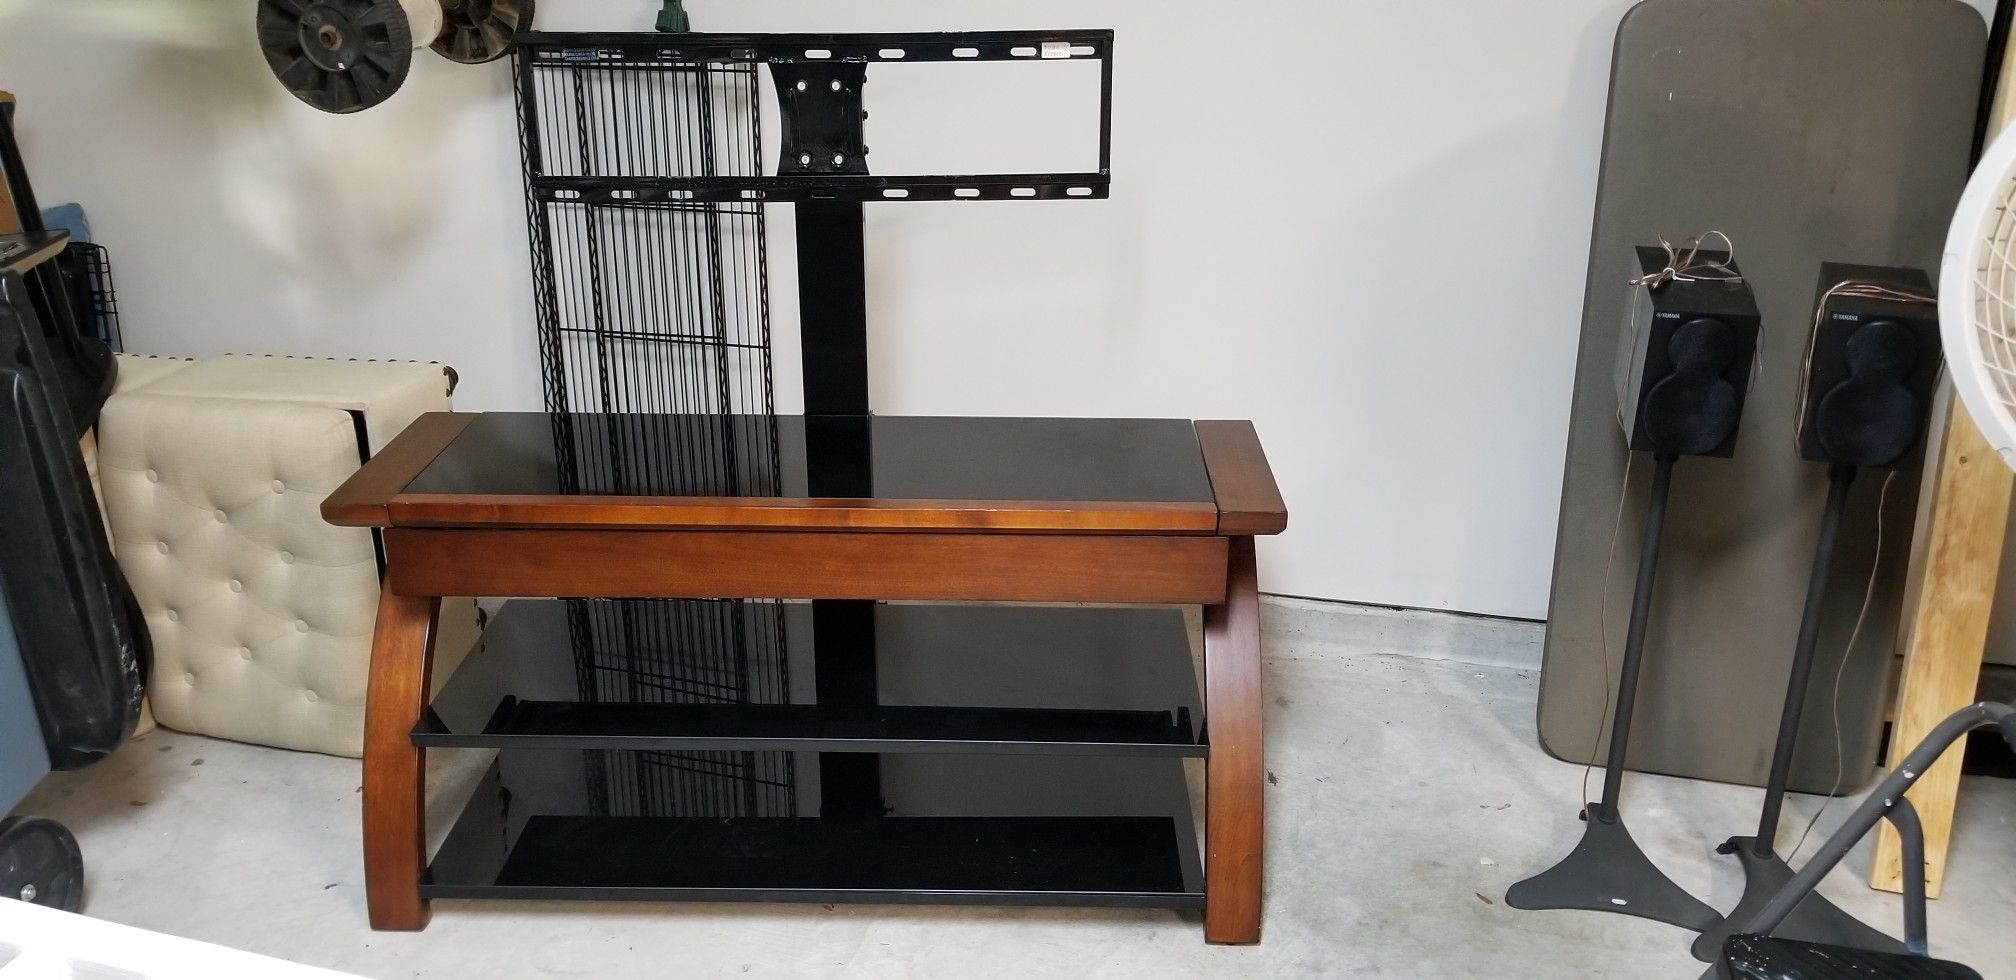 50" TV stand with drawer